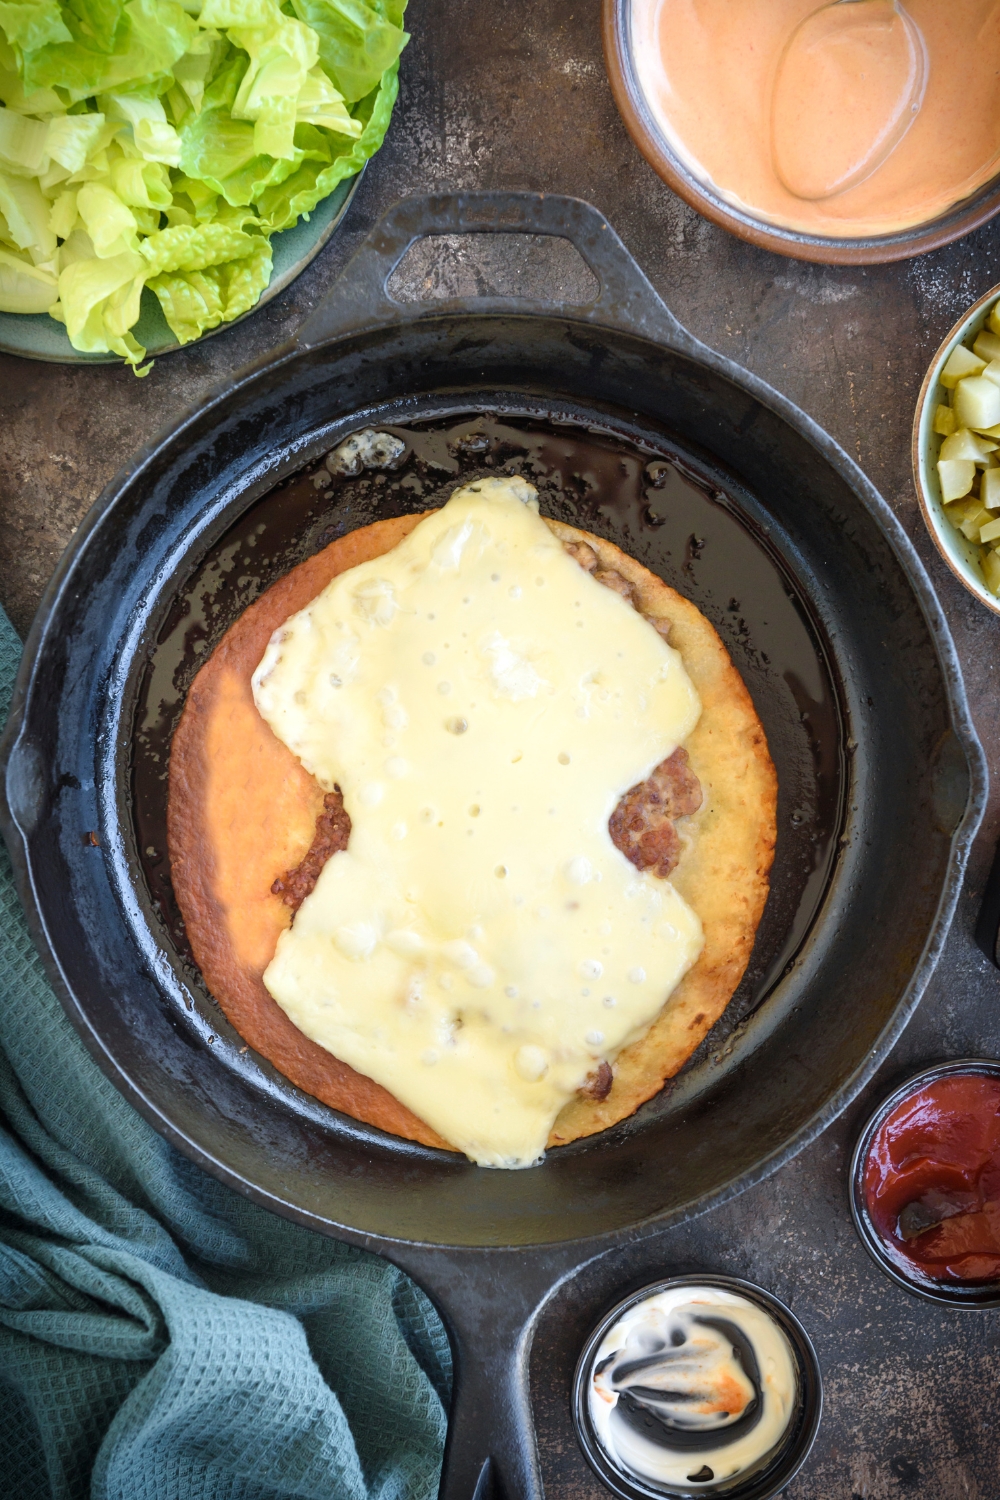 A tortilla sits in a cast iron pan with a smashed patty and cheese on top. Bowls of ingredients surround the cast iron pan.